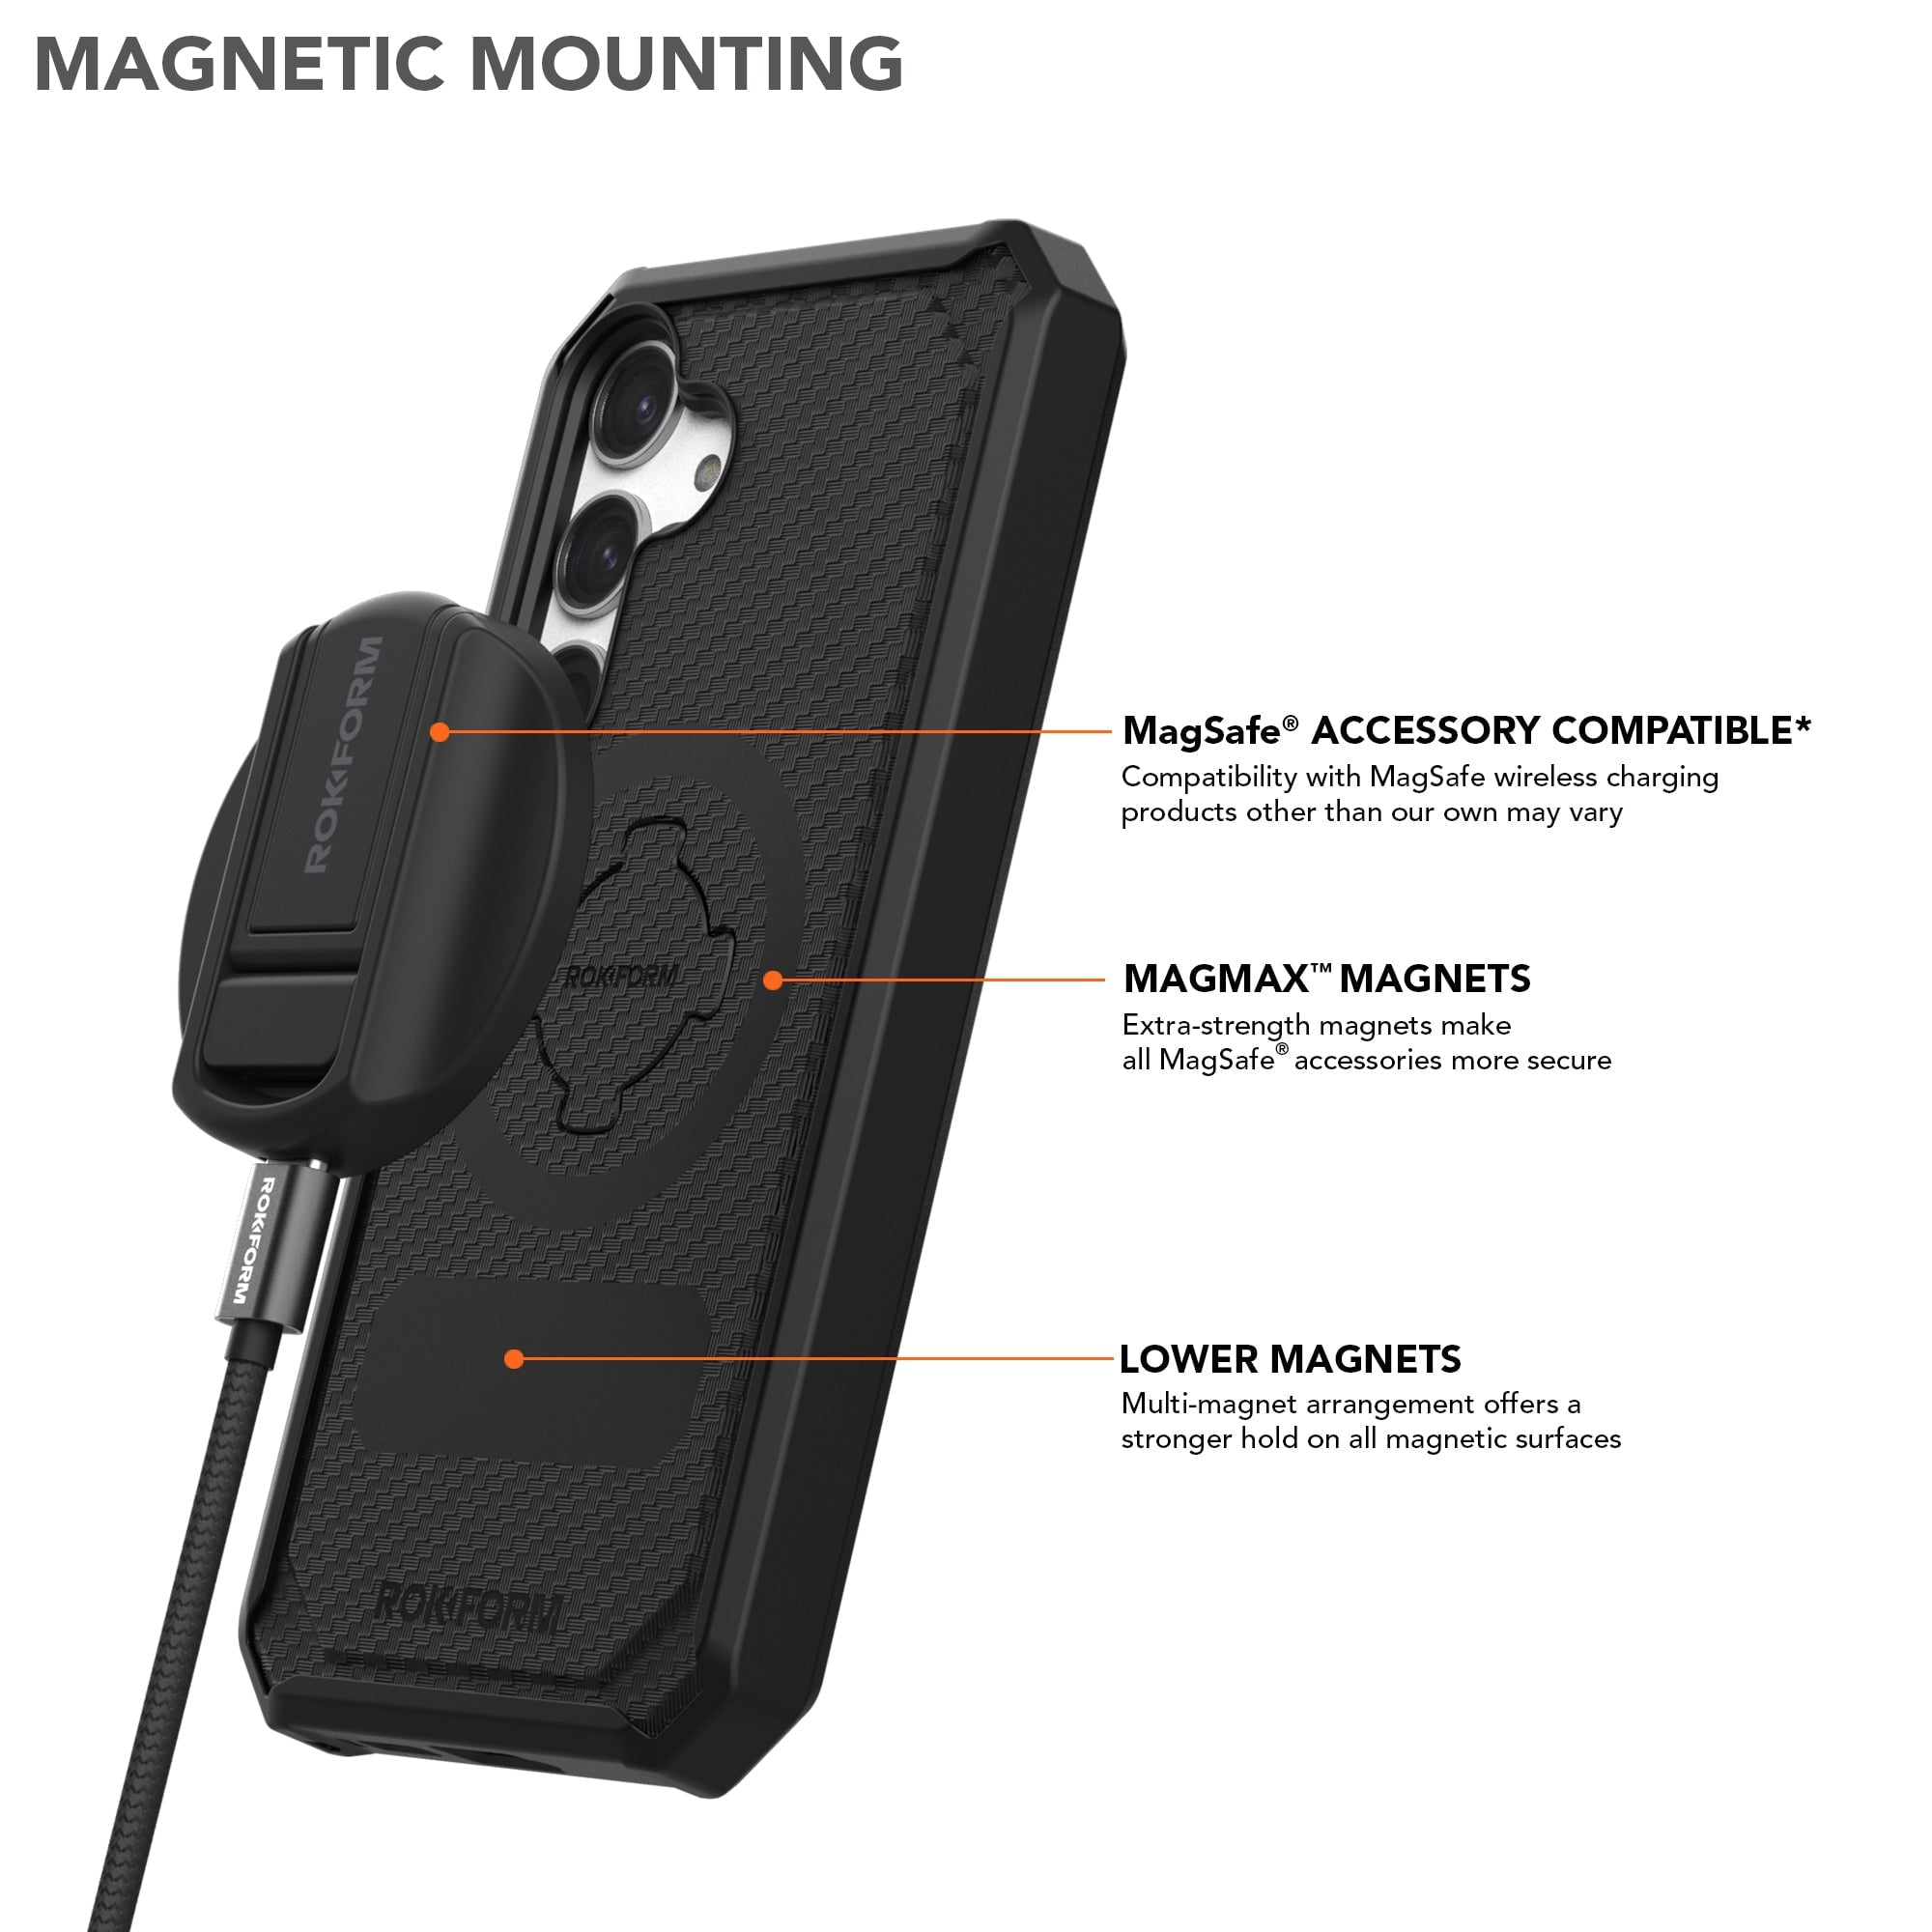 Samsung Galaxy S24 Plus Magnetic Mounting